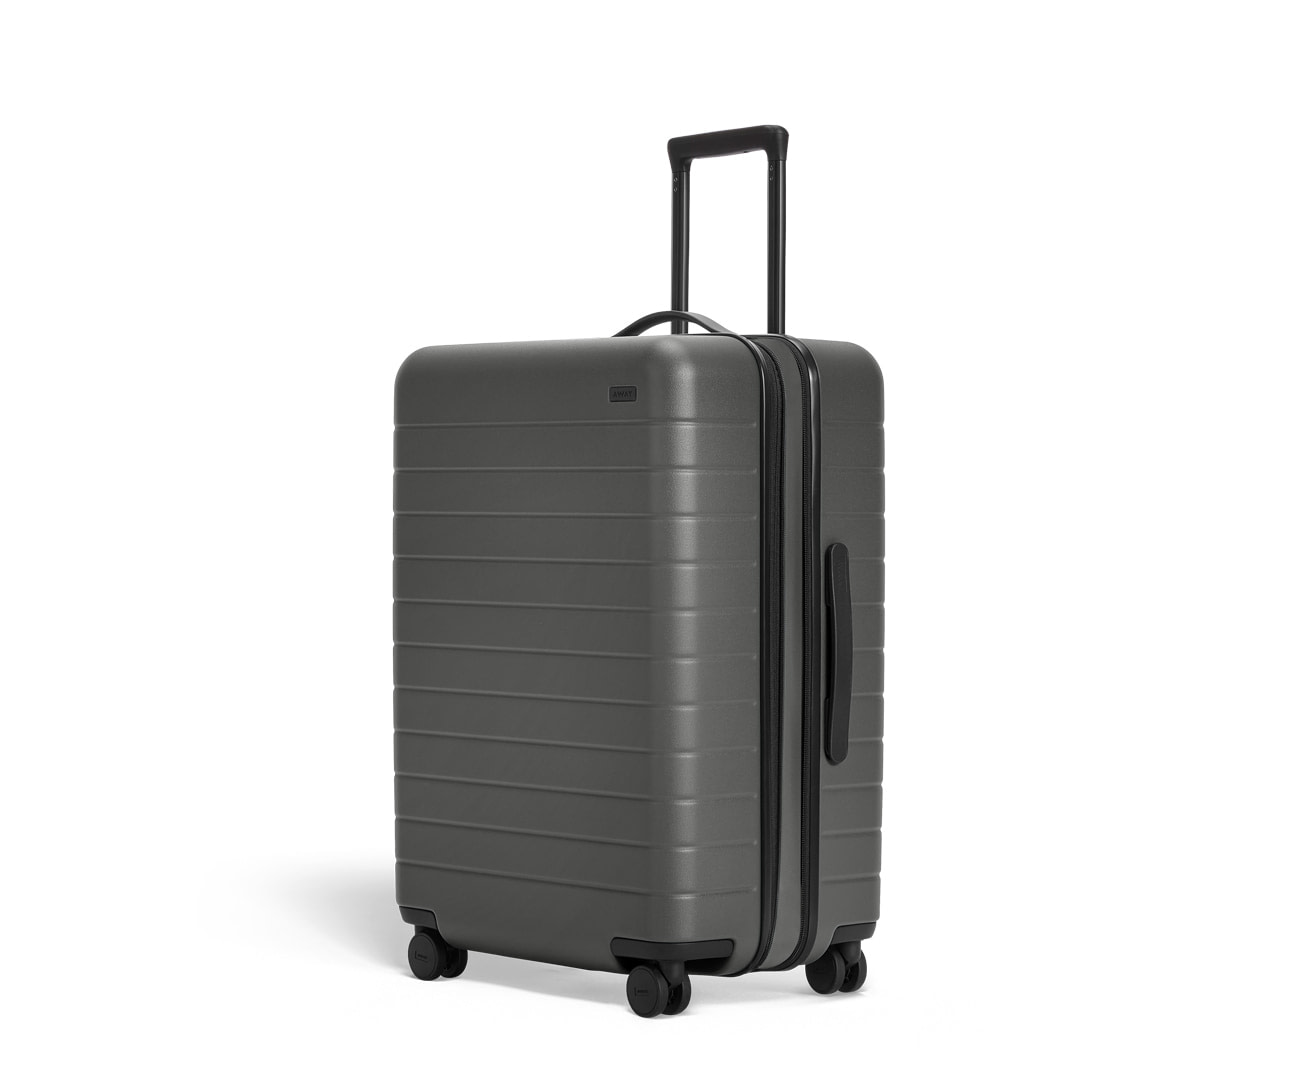 Best Checked Luggage for Frequent Travelers